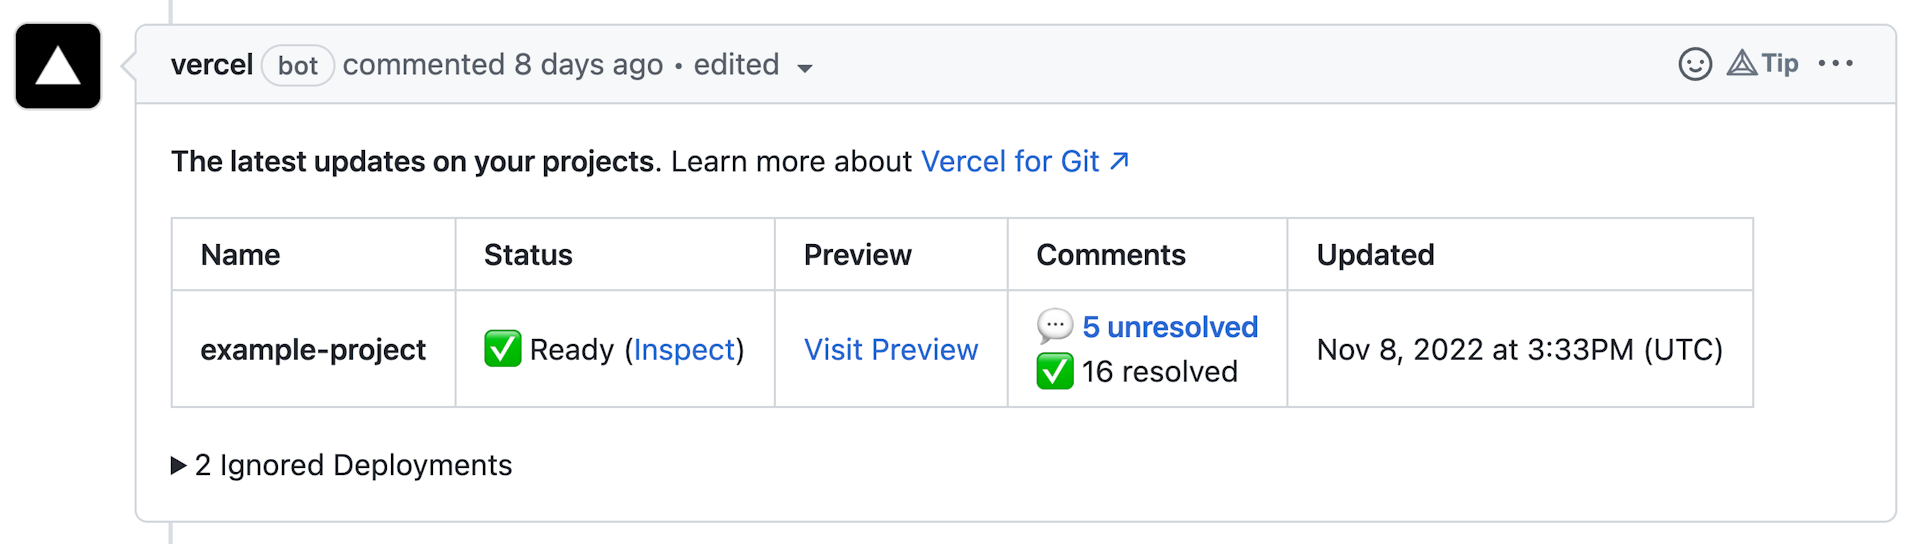 A message from Vercel bot in a GitHub PR.